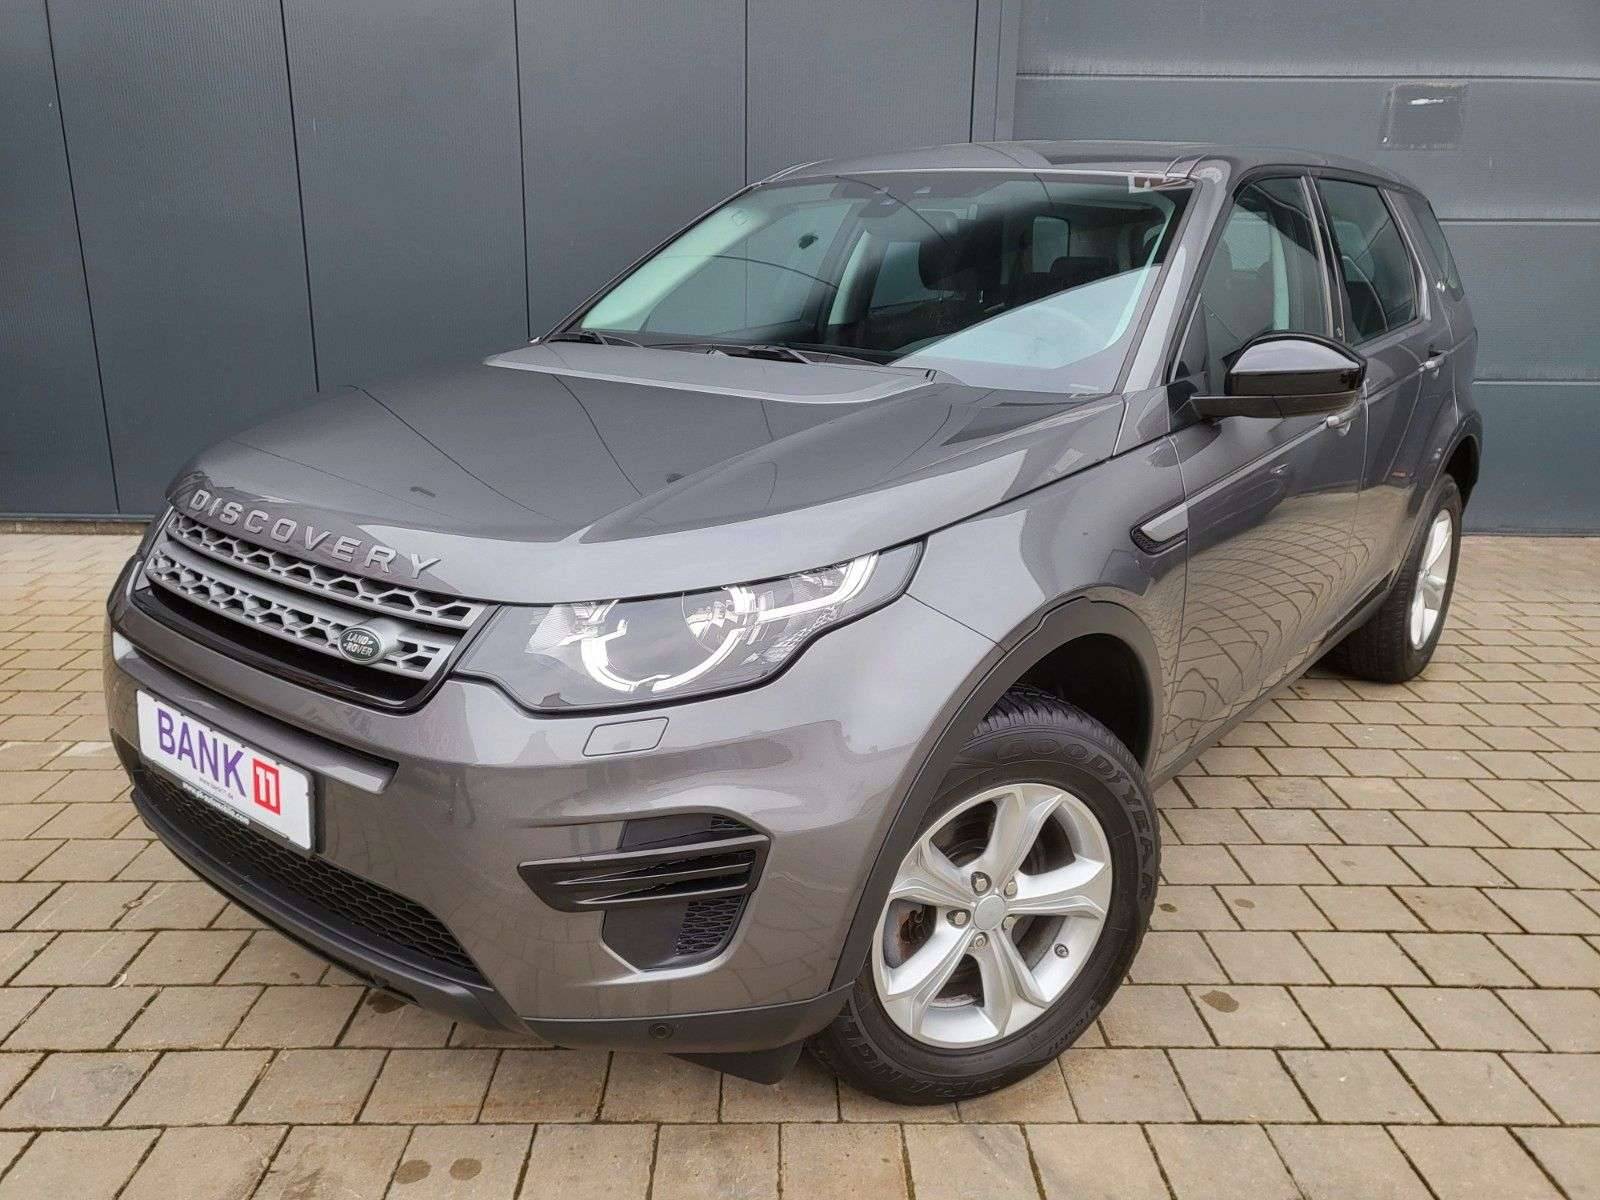 For Land Rover Discovery Sport 2.0 TD4 (2017) offered for £18,922